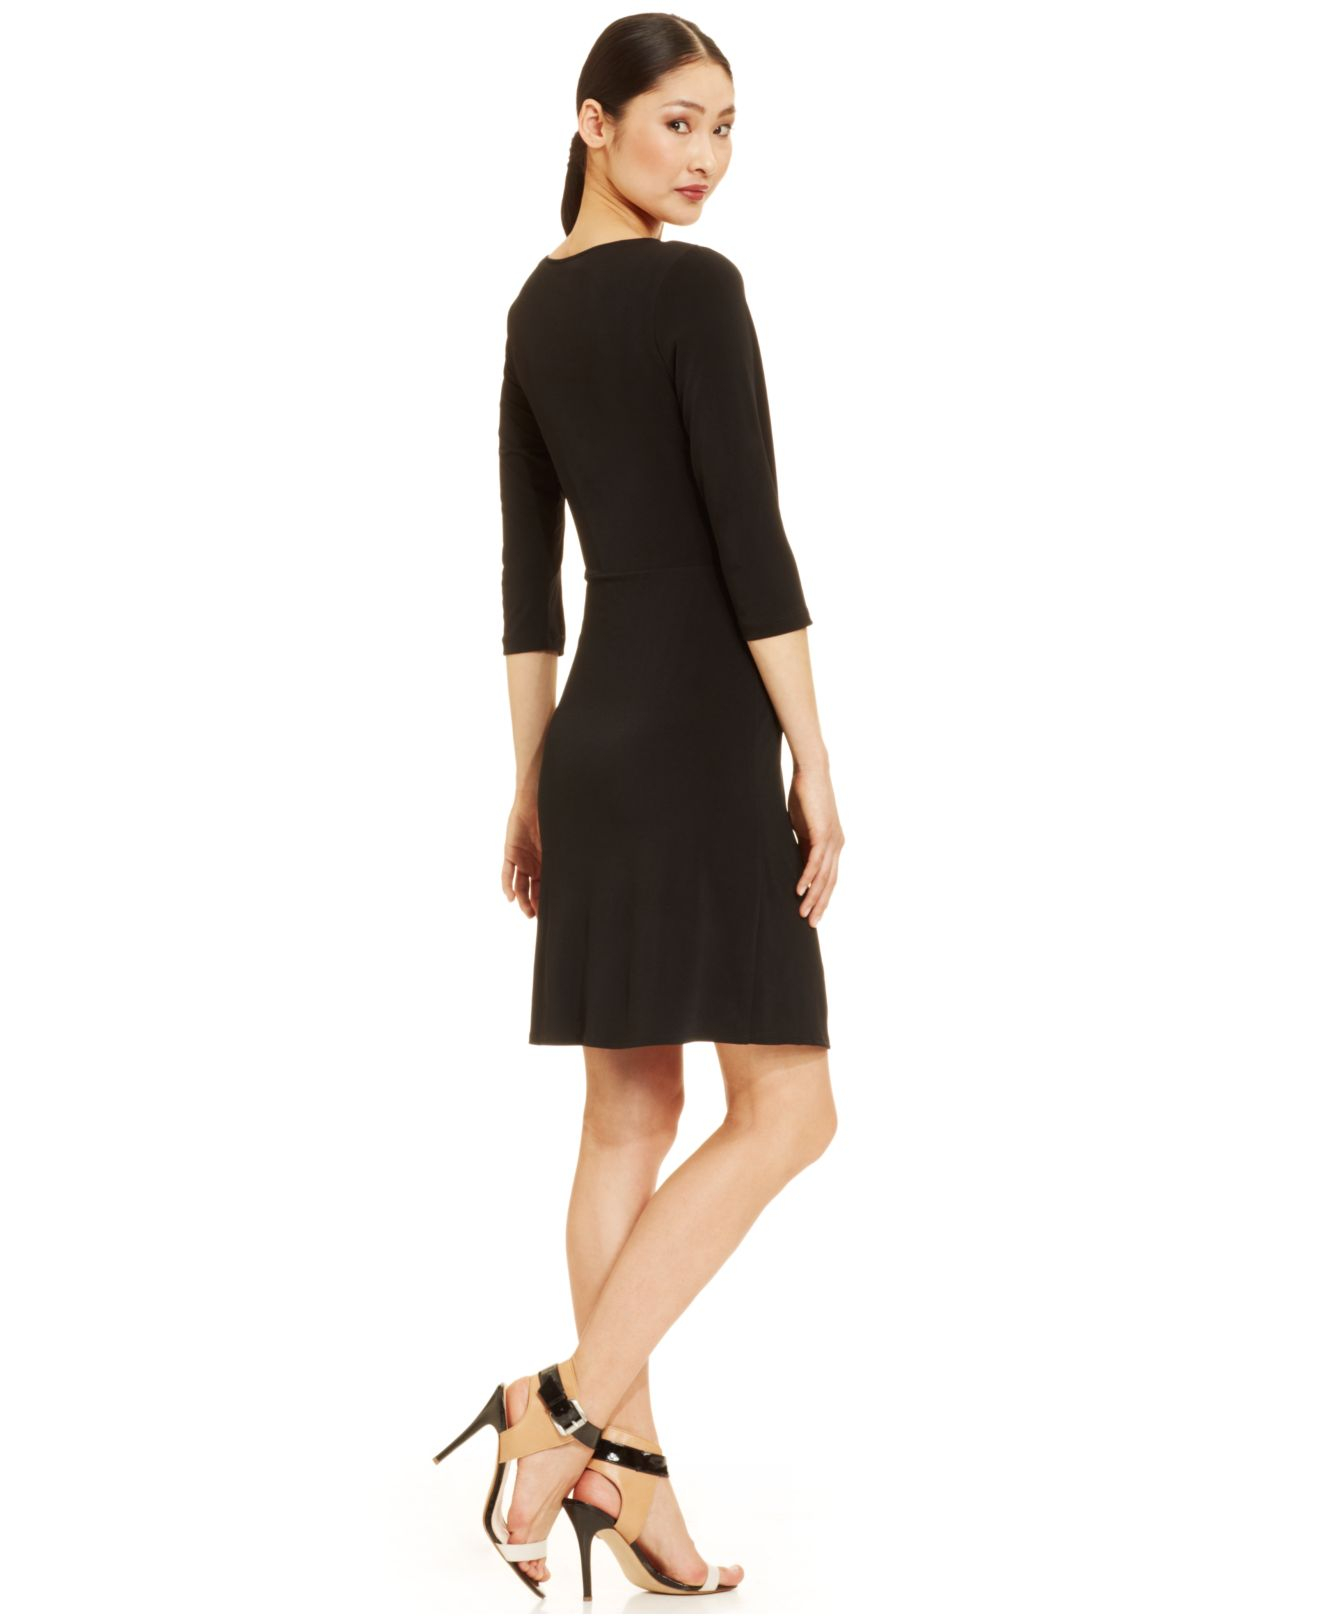 Lyst - Miraclesuit Ruched Hardware Faux-Wrap Dress in Black